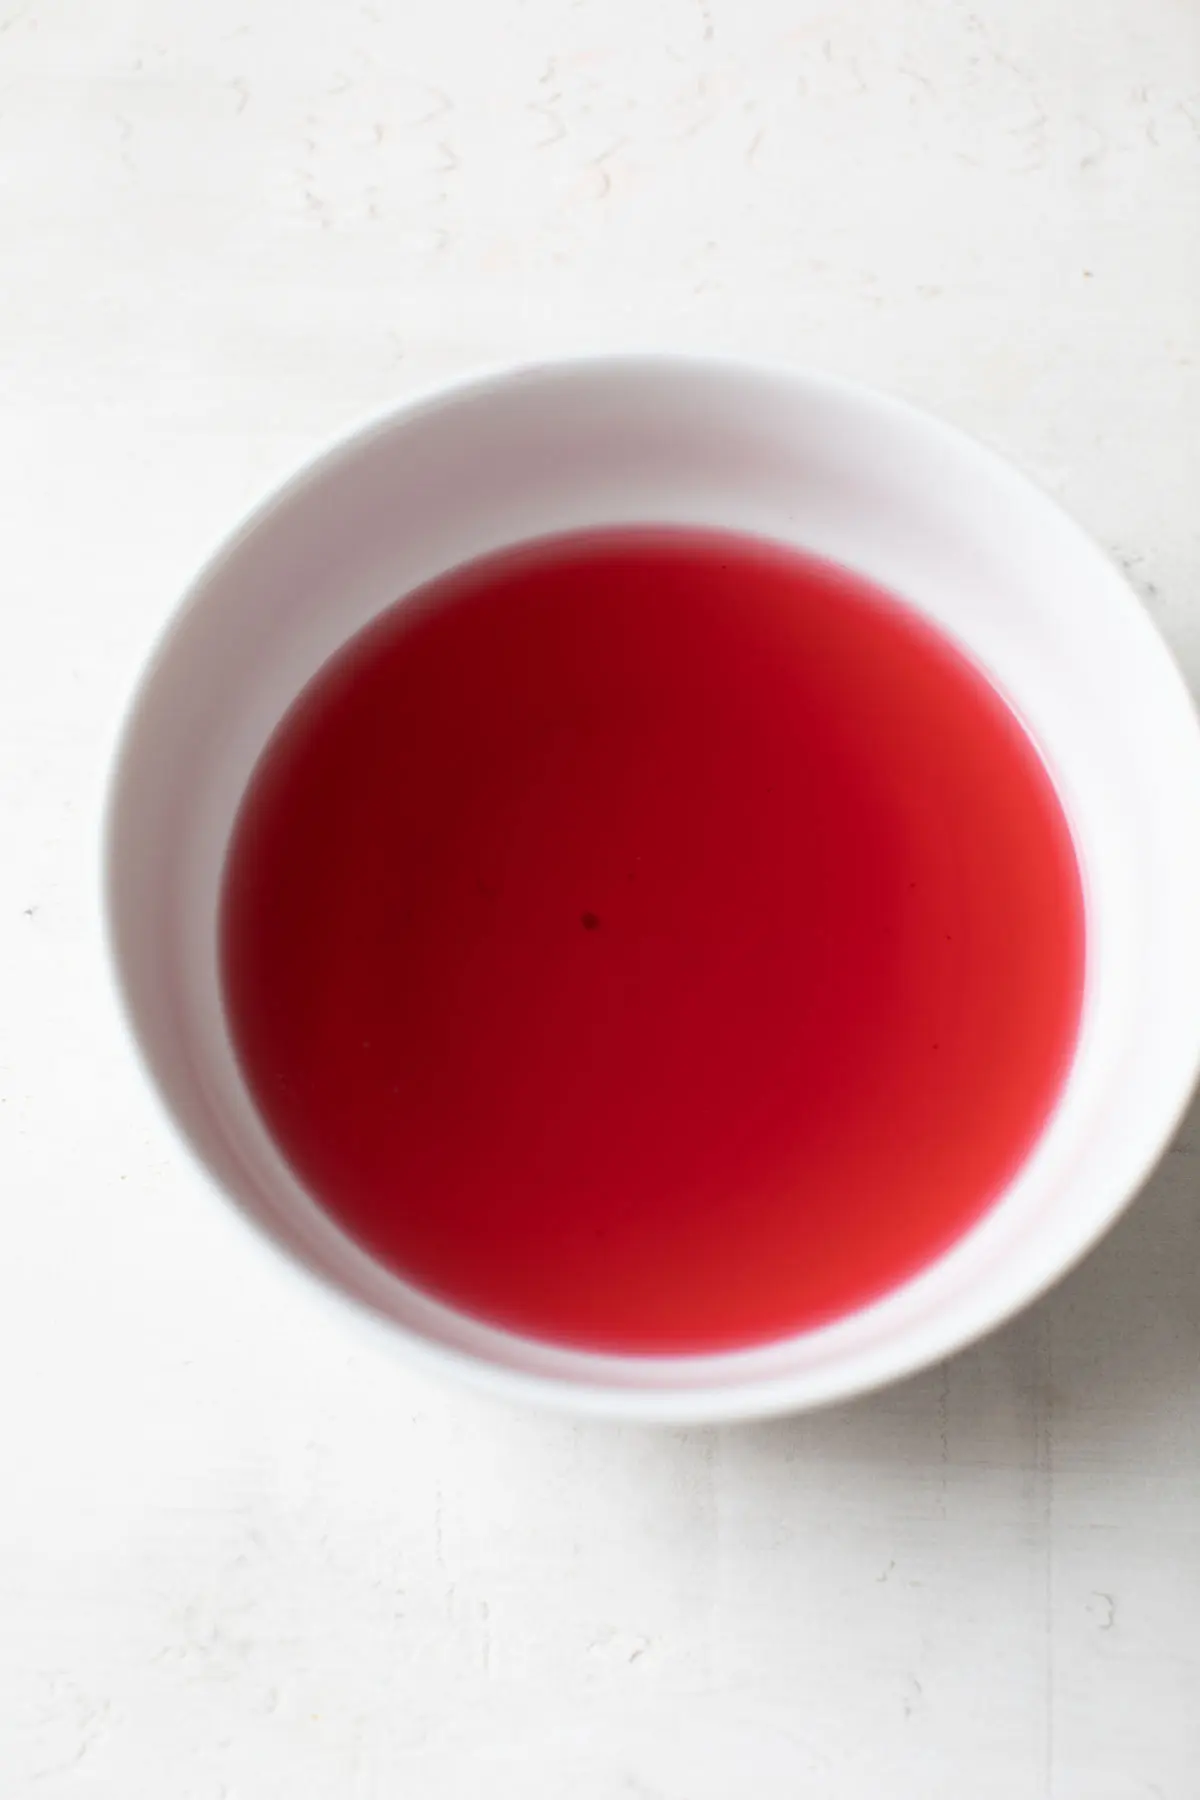 brewed hibiscus tea in a bowl